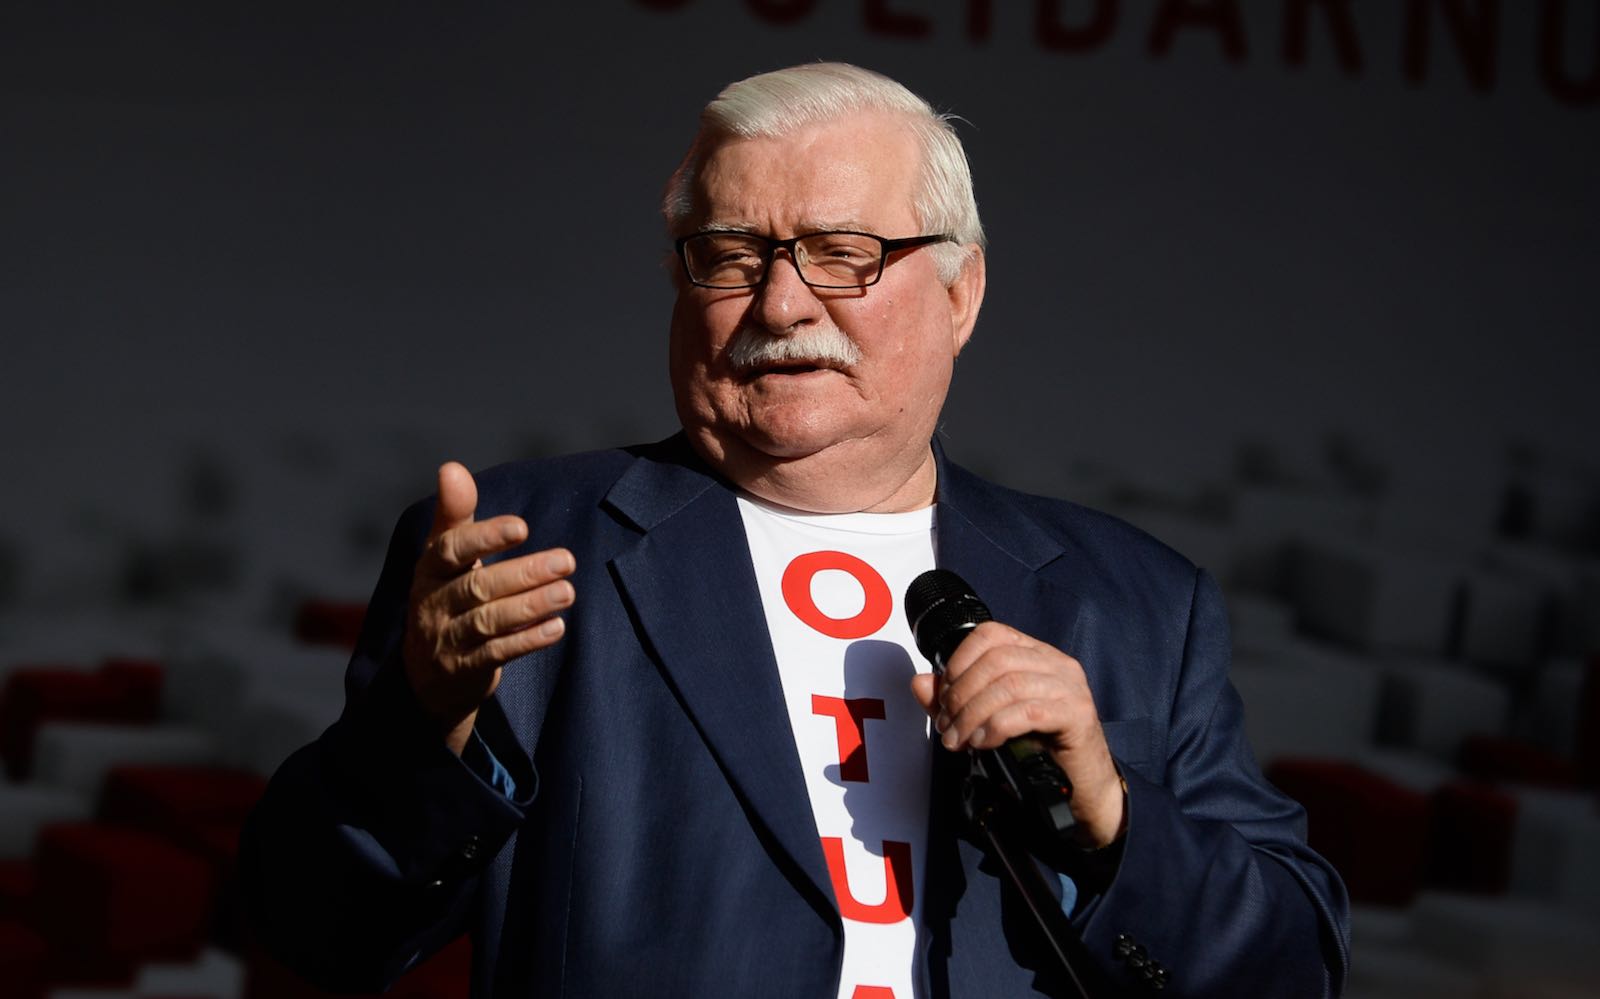 Lech Wałęsa speaking at an event to mark the thirtieth anniversary of free elections in Poland, Gdansk, June 4, 2019